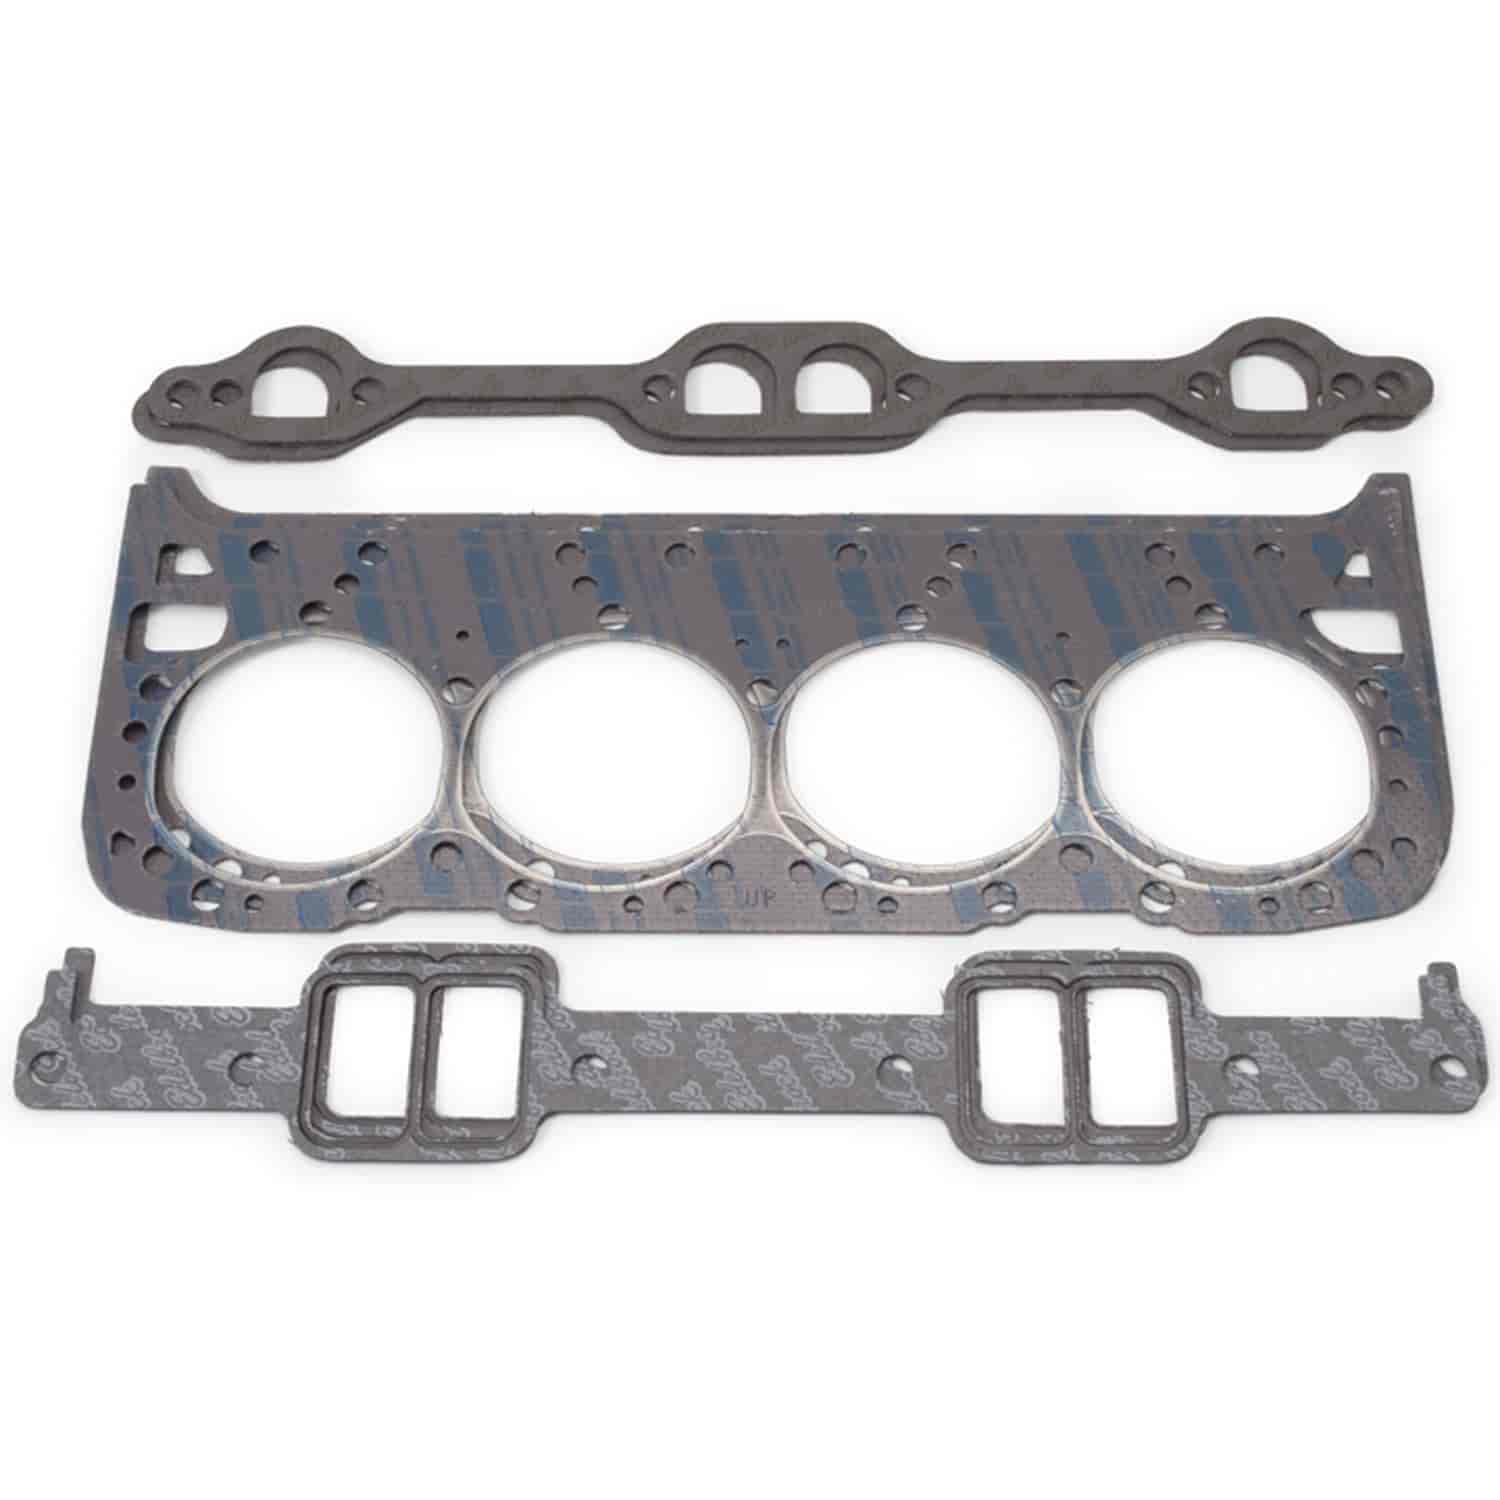 Complete Head Gasket Set for Chevy LT4 1992-1997